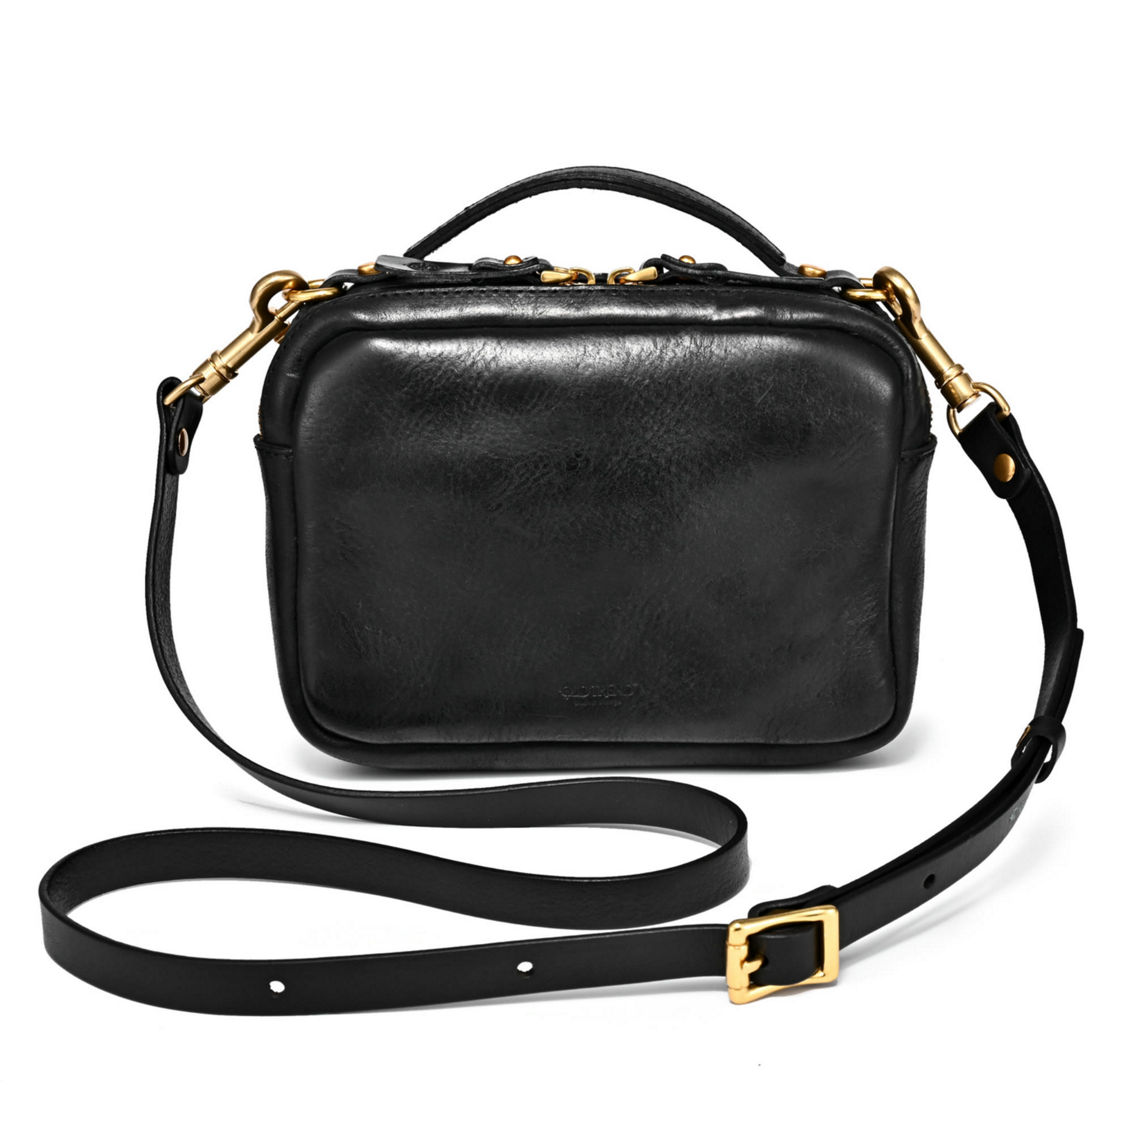 Old Trend Ficus Leather Crossbody - Image 5 of 5